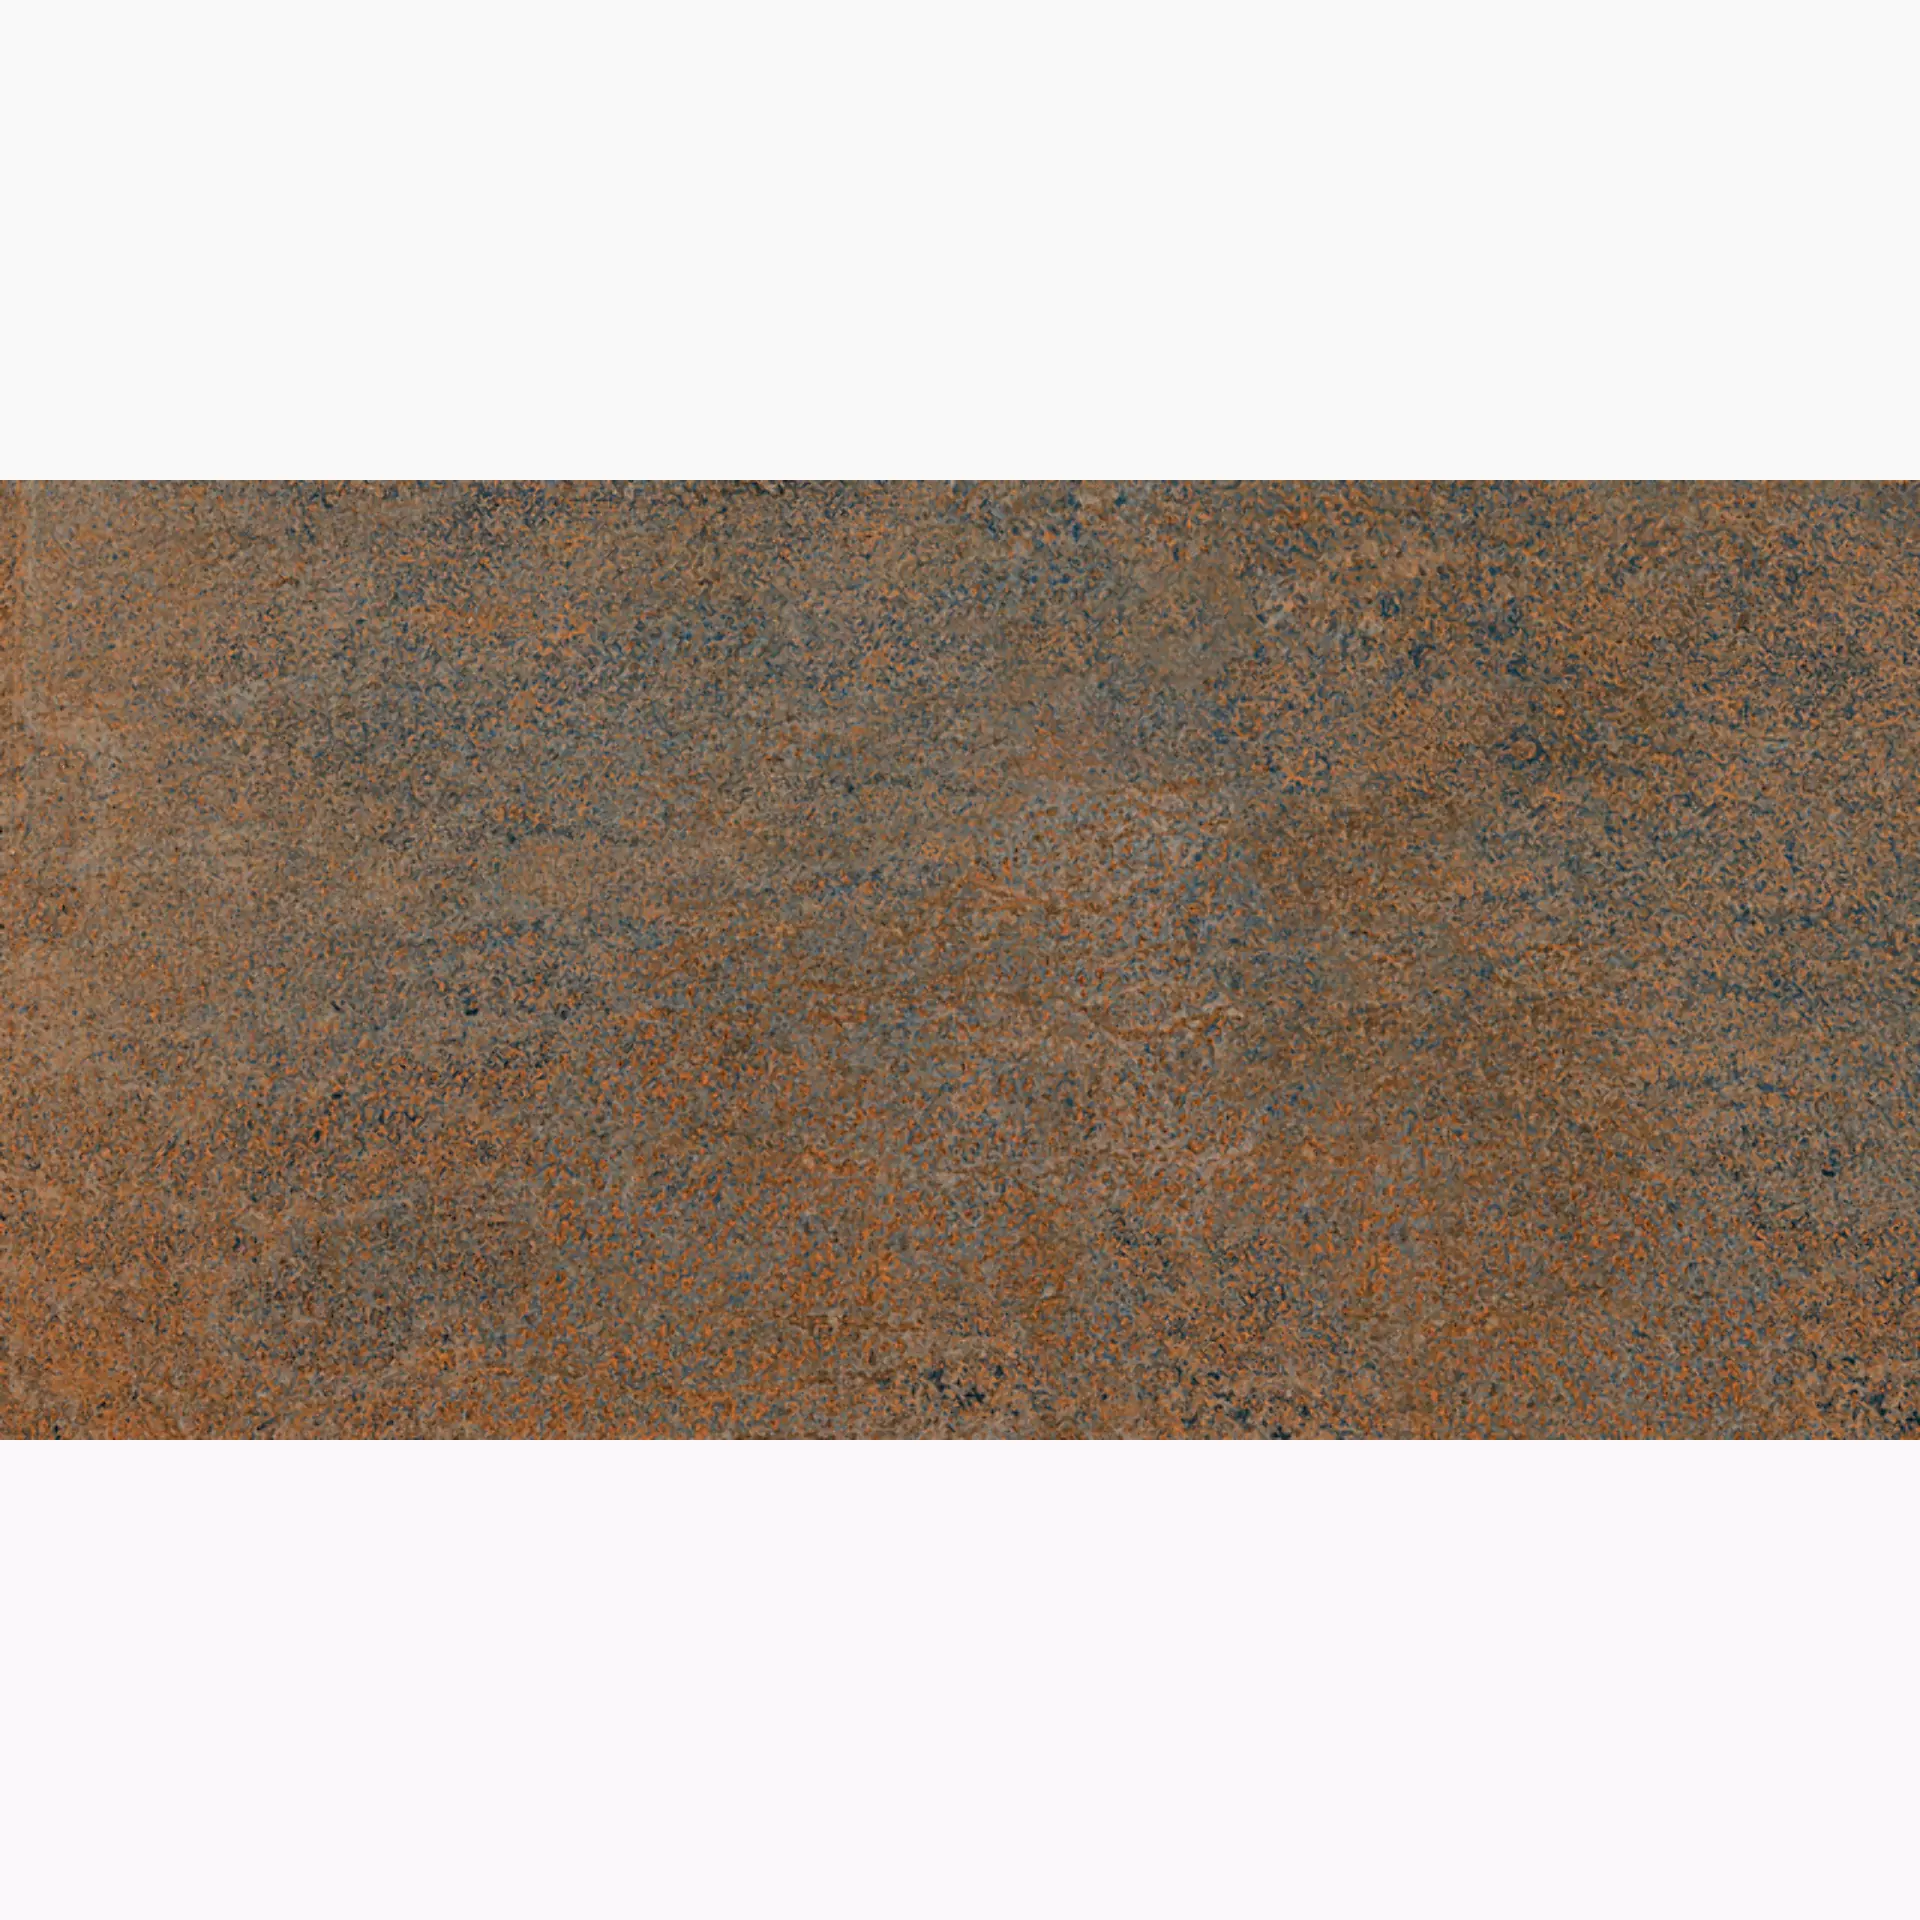 Sant Agostino Oxidart Copper Natural CSAOXCOP30 30x60cm rectified 10mm